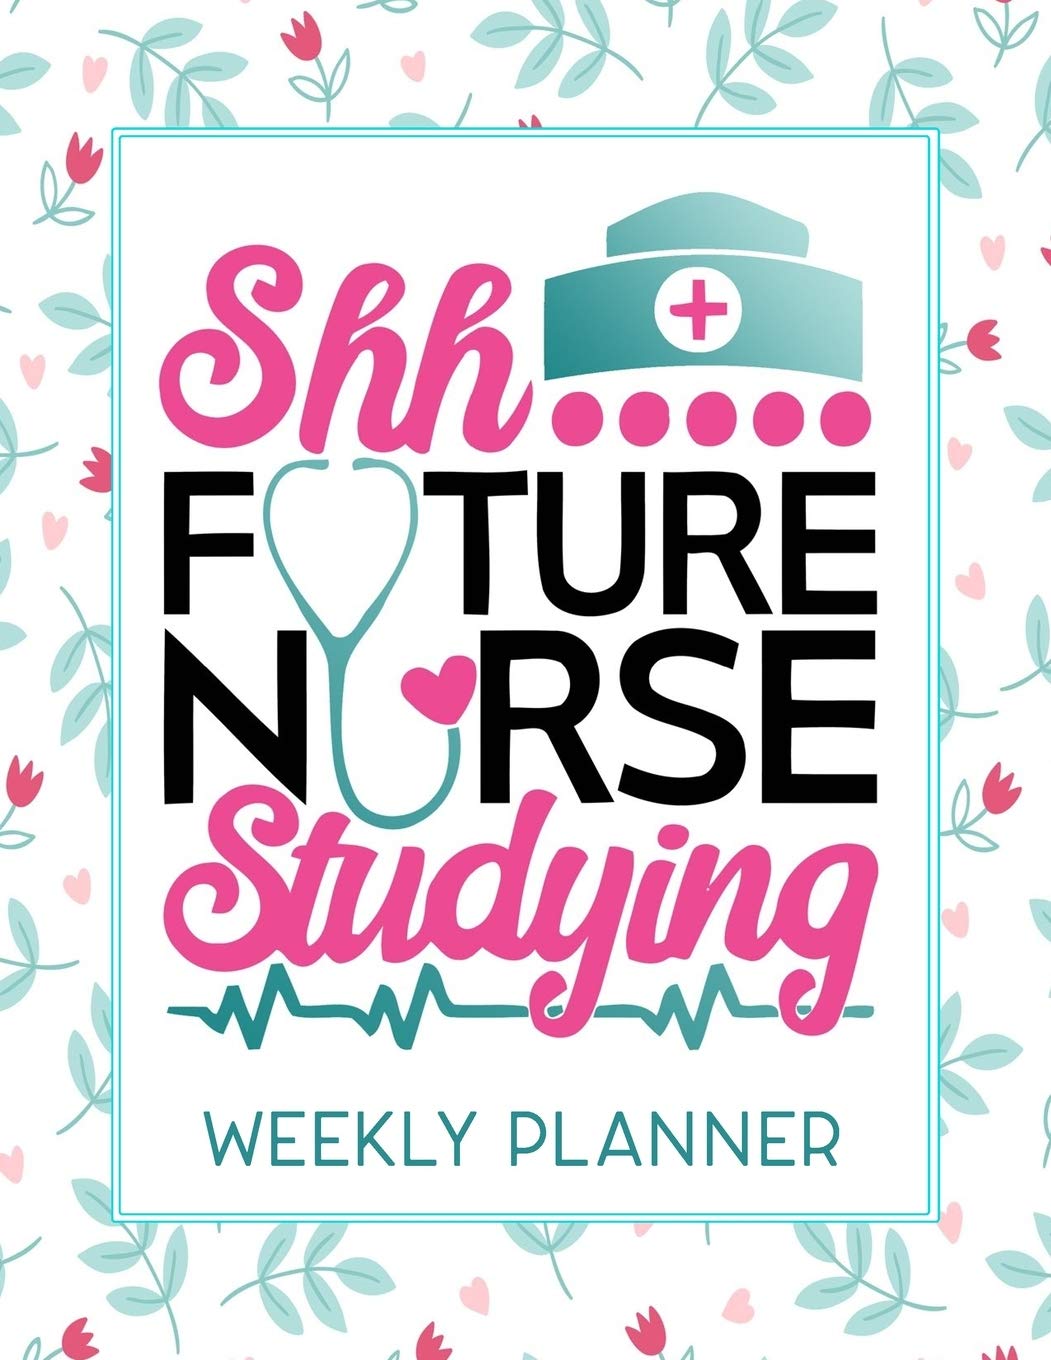 Shh Future Nurse Studying Weekly Planner Calendar With To Do List